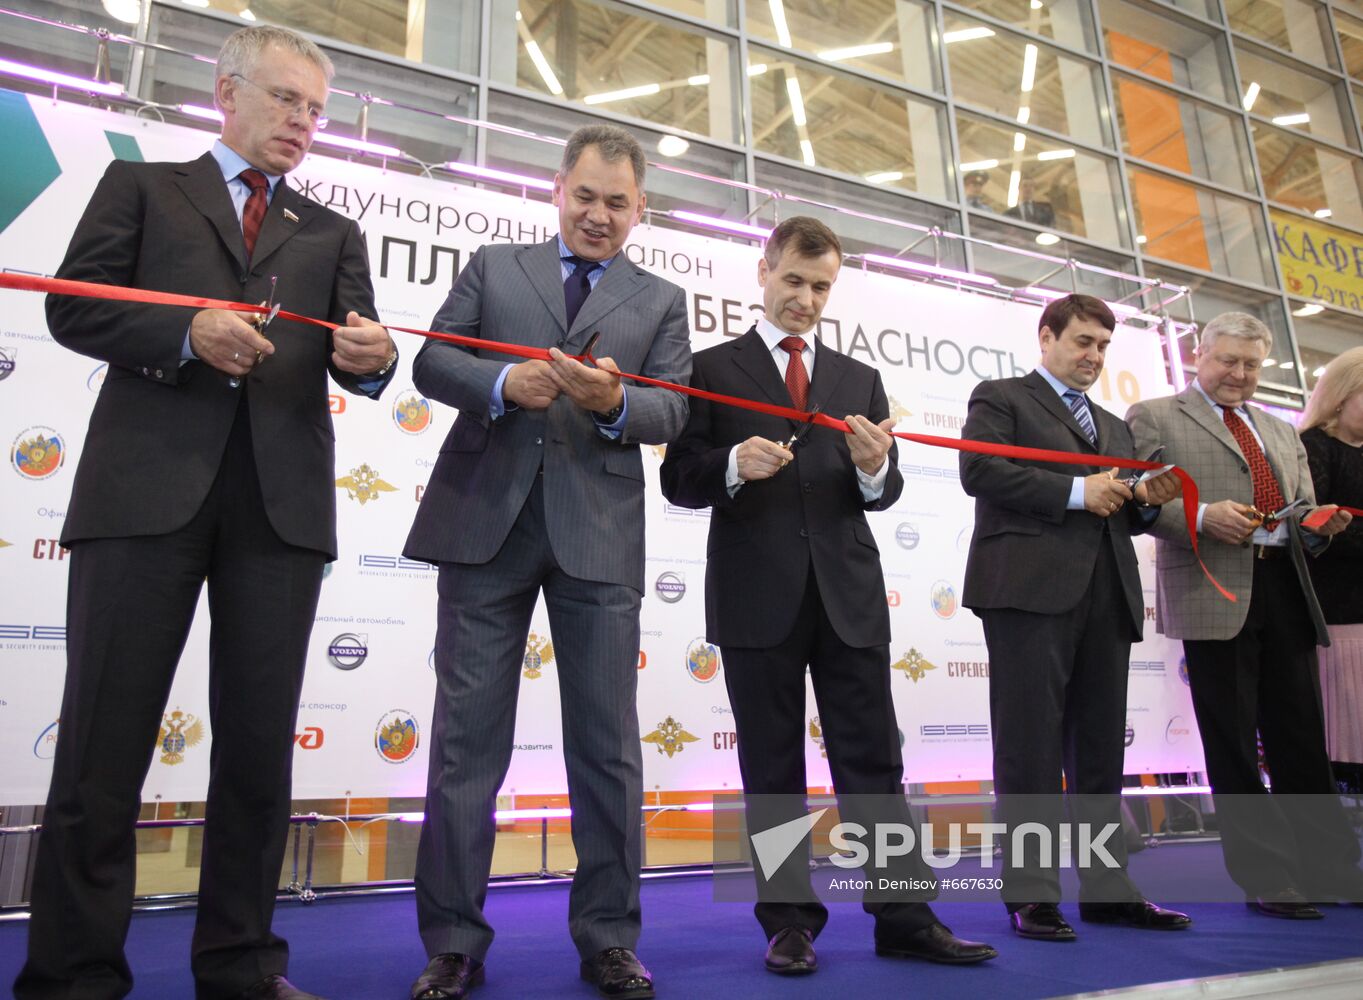 International exhibition "Integrated Safety and Security 2010"